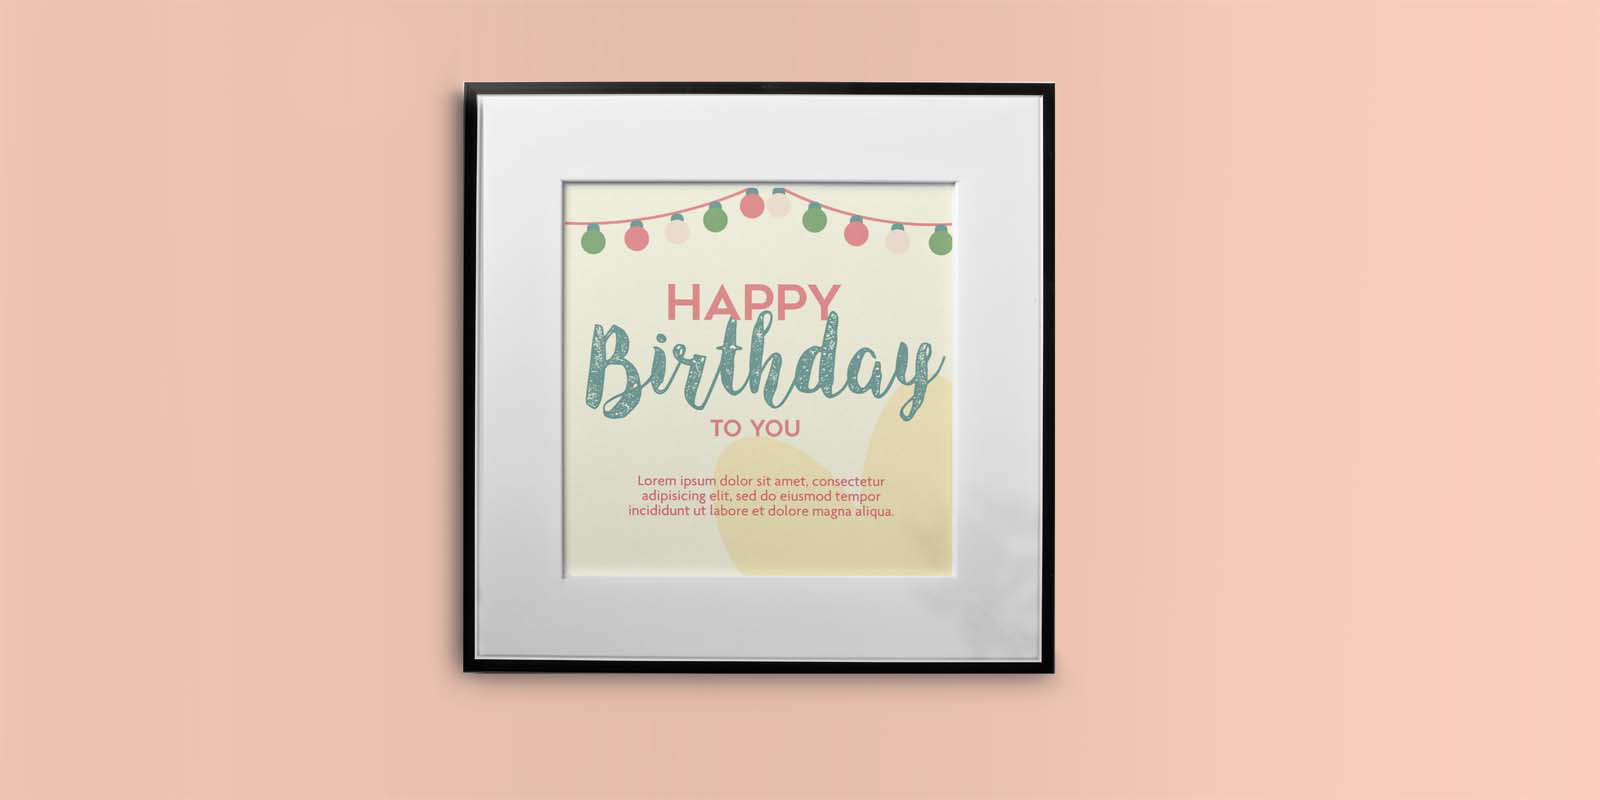 Birthday prints in Berlin - Print with Pagerr